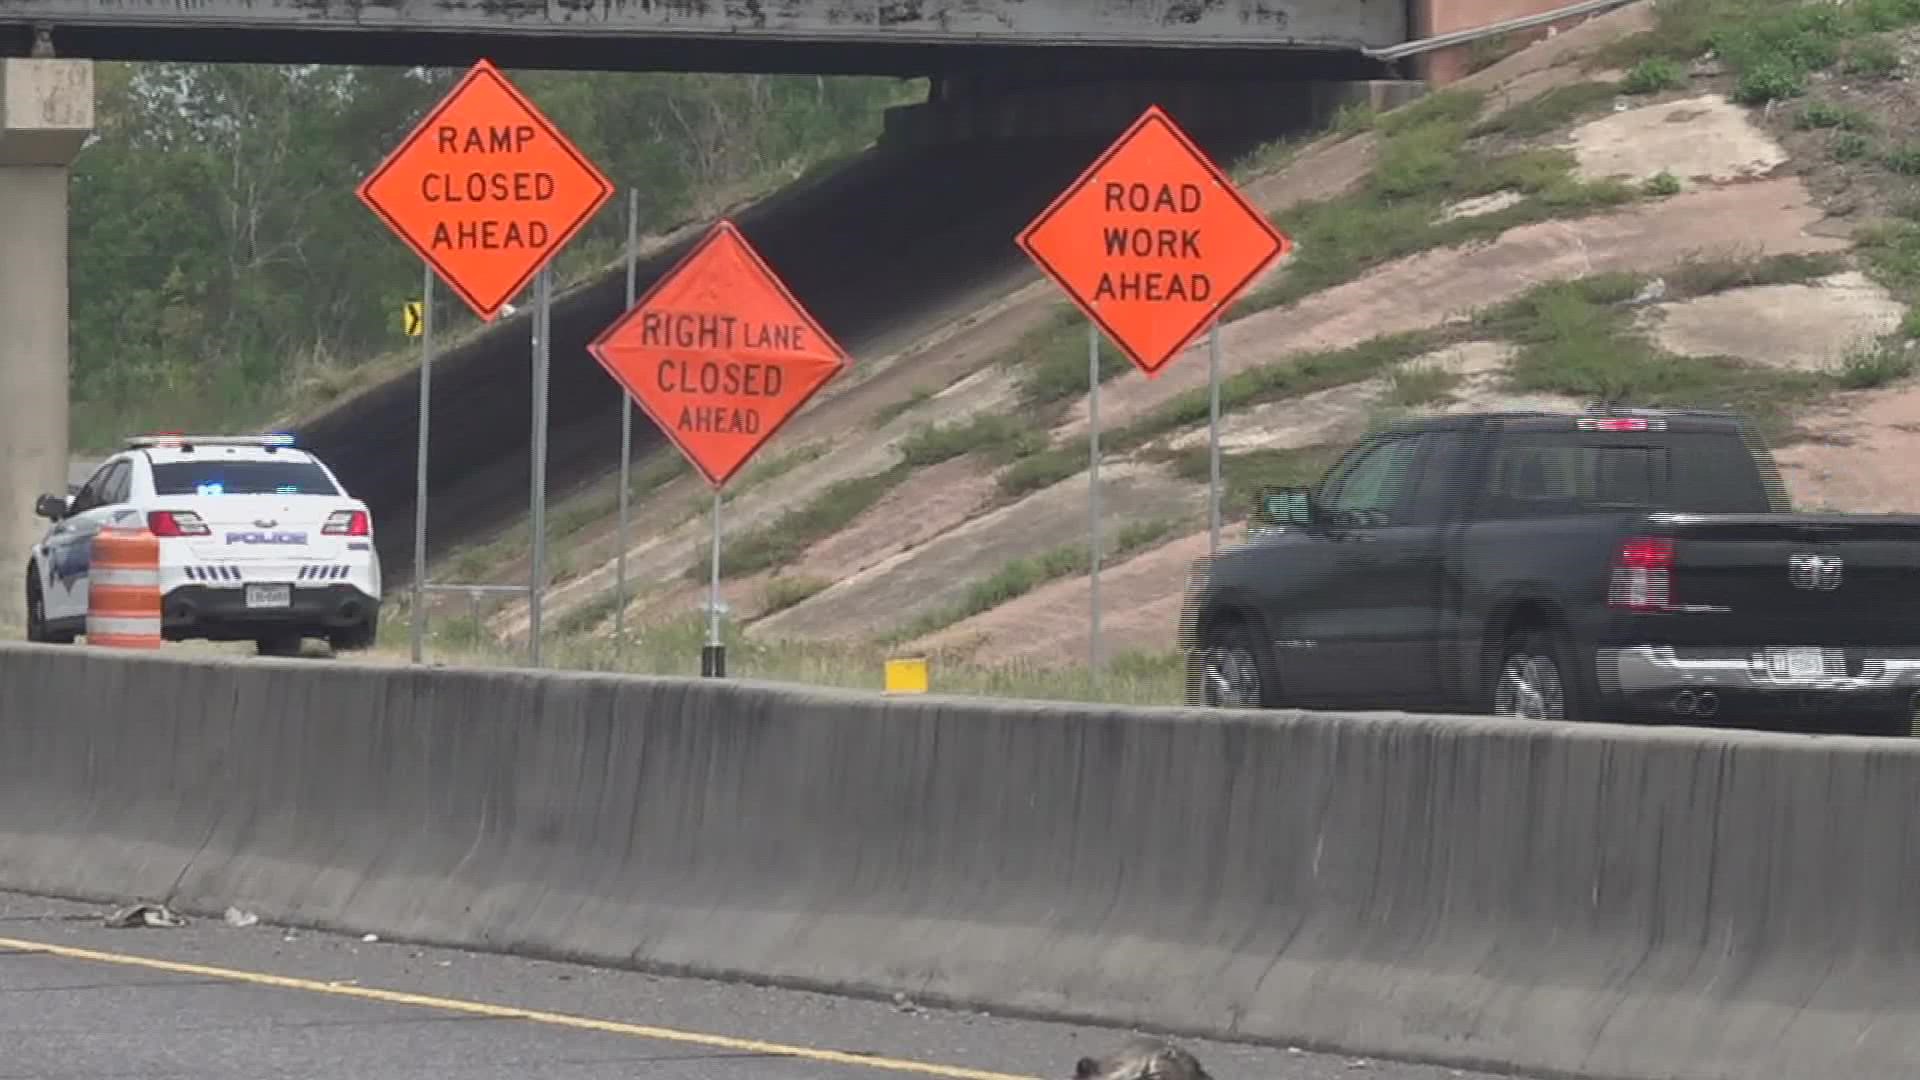 Drivers described the Cloverleaf interchange as confusing, scary and even dangerous at times, with very little room to exit or merge.